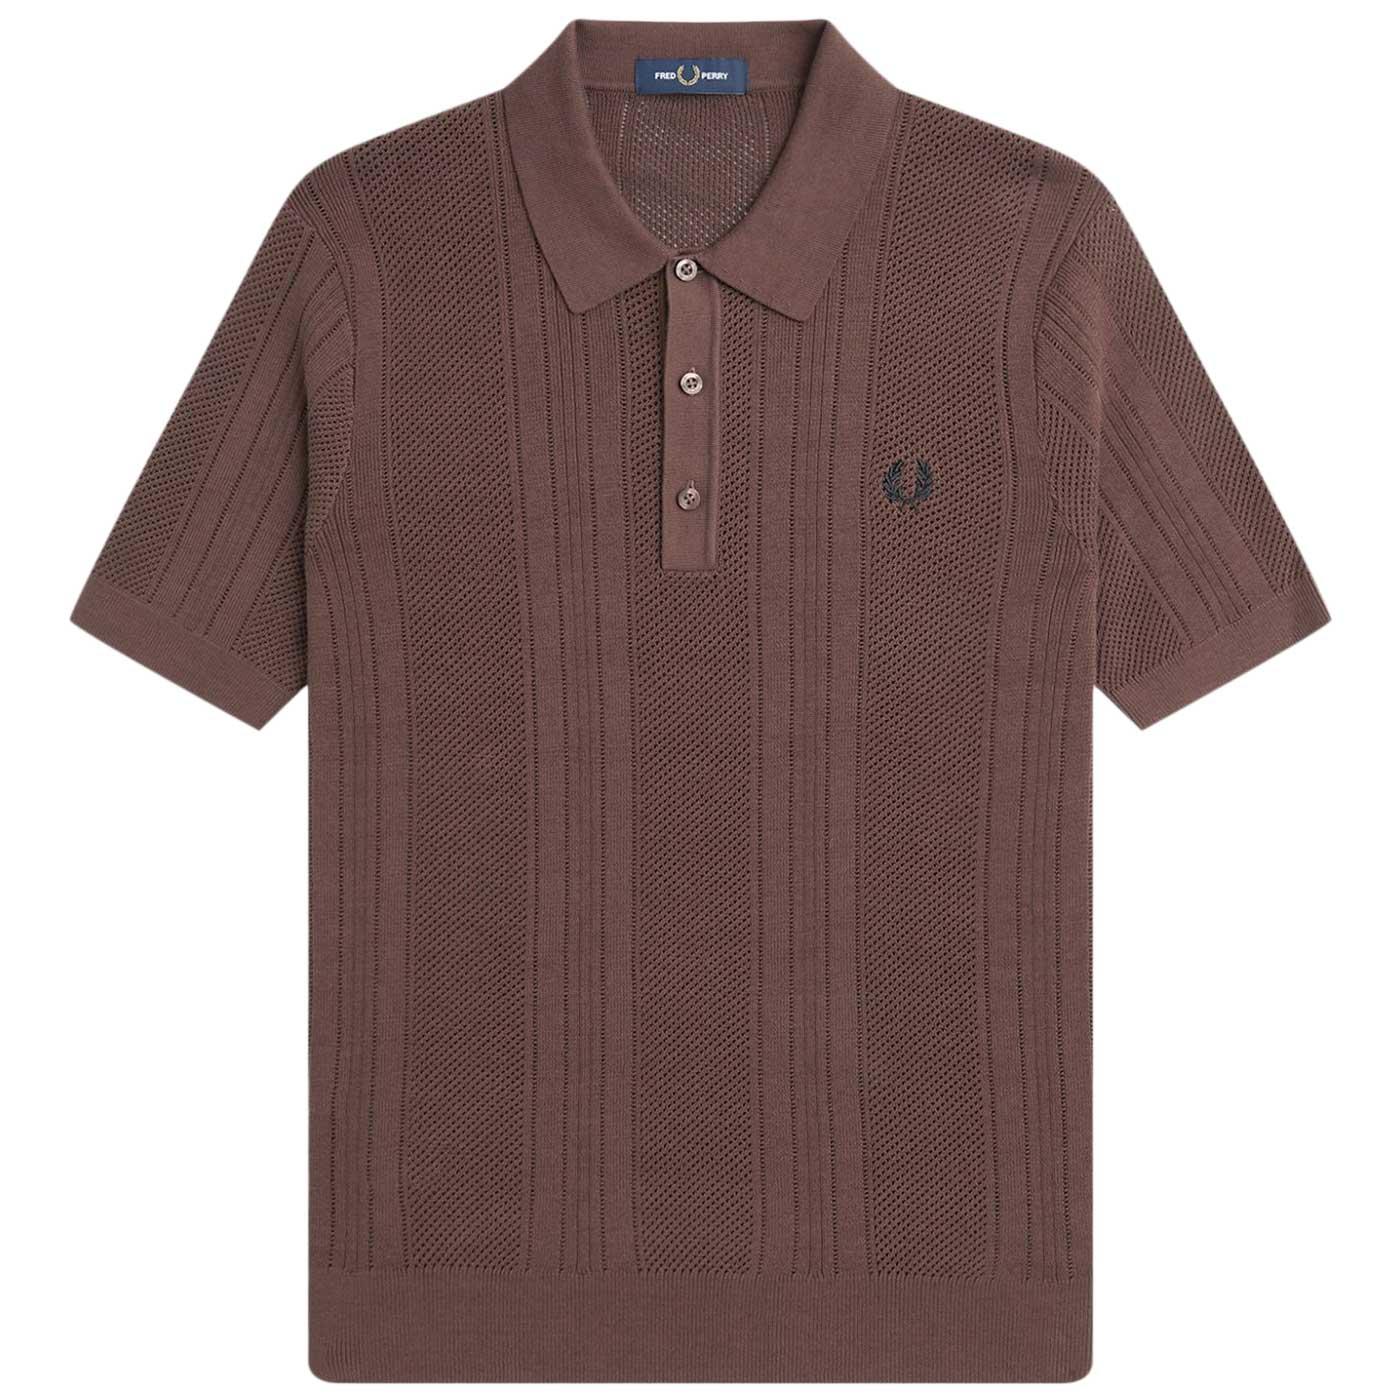 Fred Perry Vintage Crochet Knit S/S Polo Shirt CB